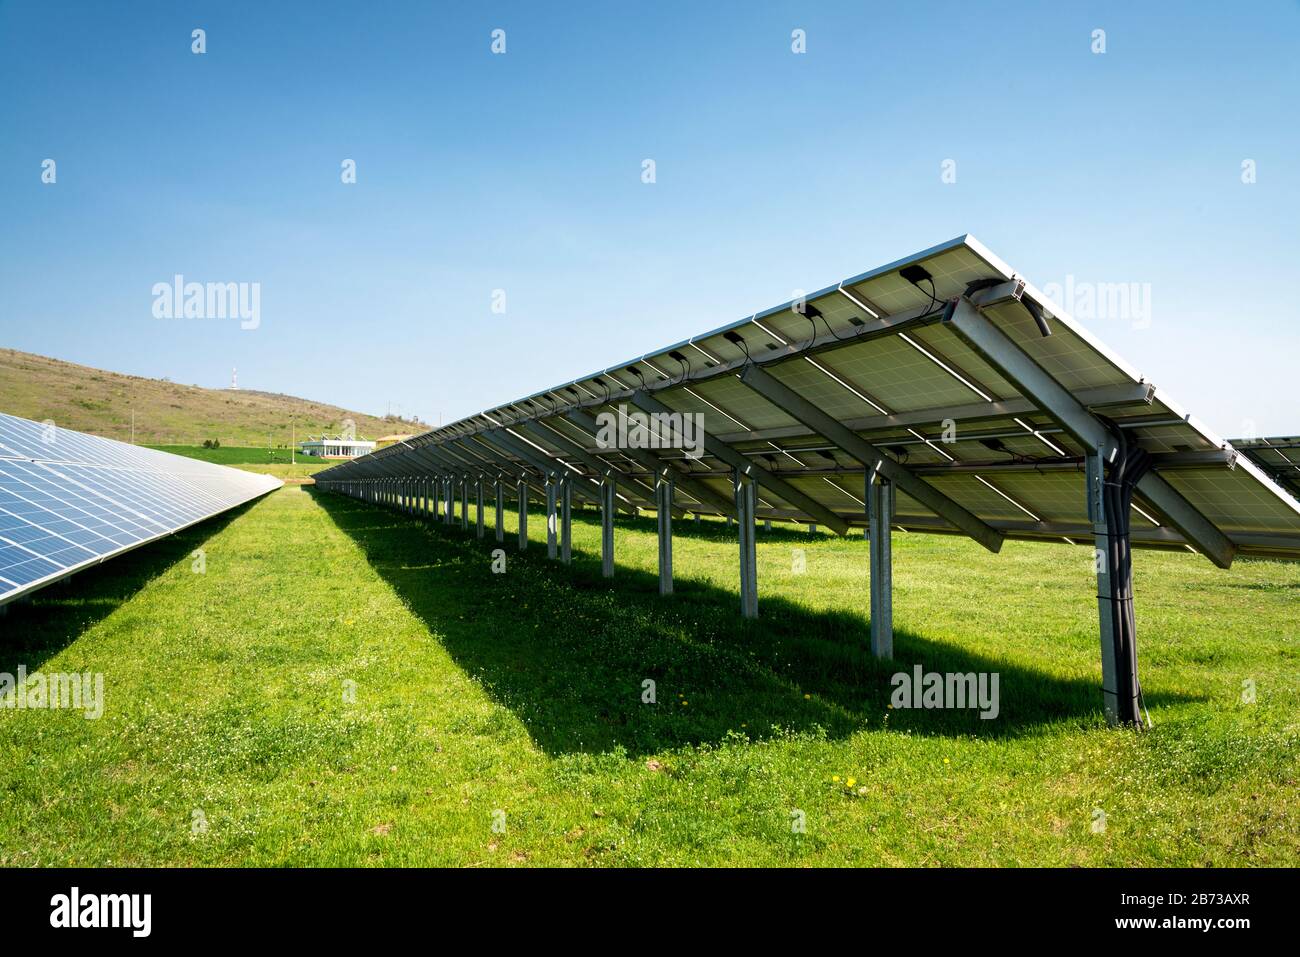 Solar panel, photovoltaic, alternative electricity source - concept of sustainable resources Stock Photo